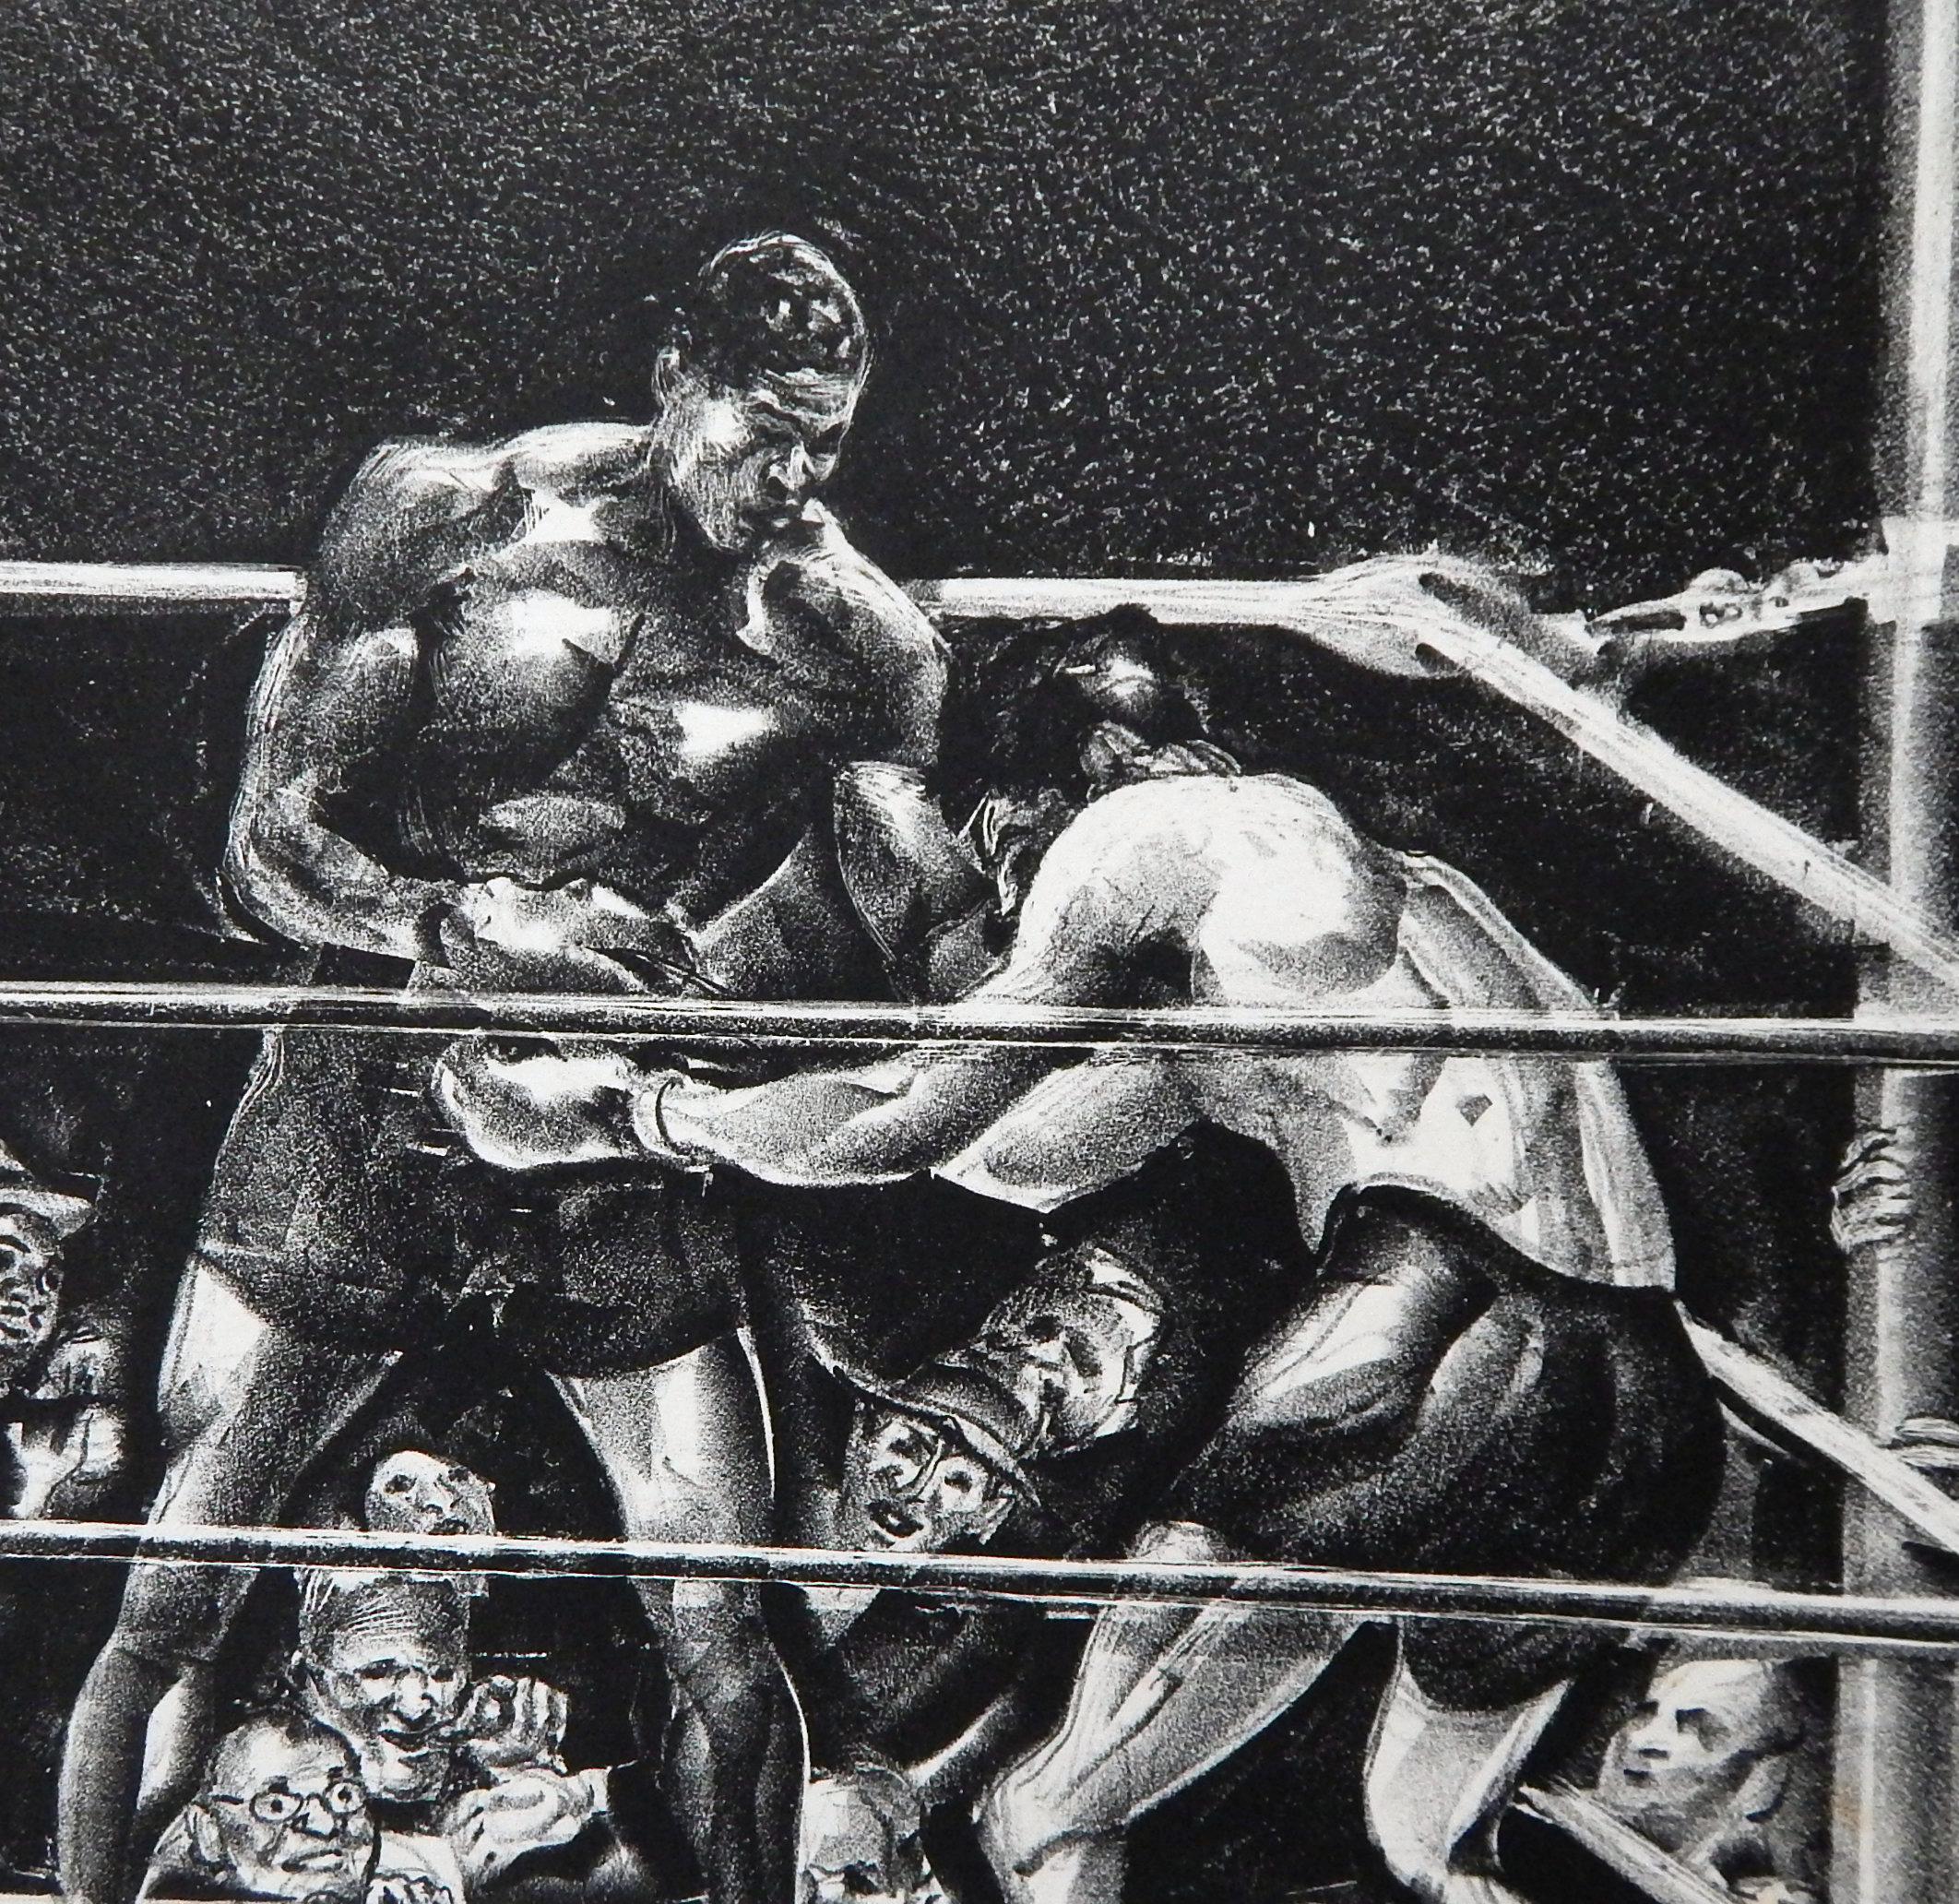 This is an original lithograph by Chicago/New York artist and illustrator Joseph Webster Golinkin (1896-1977). This print is no. 12 of the edition of 50.
The print depicts the Joe Louis vs Max Baer boxing match which took place on September 24,